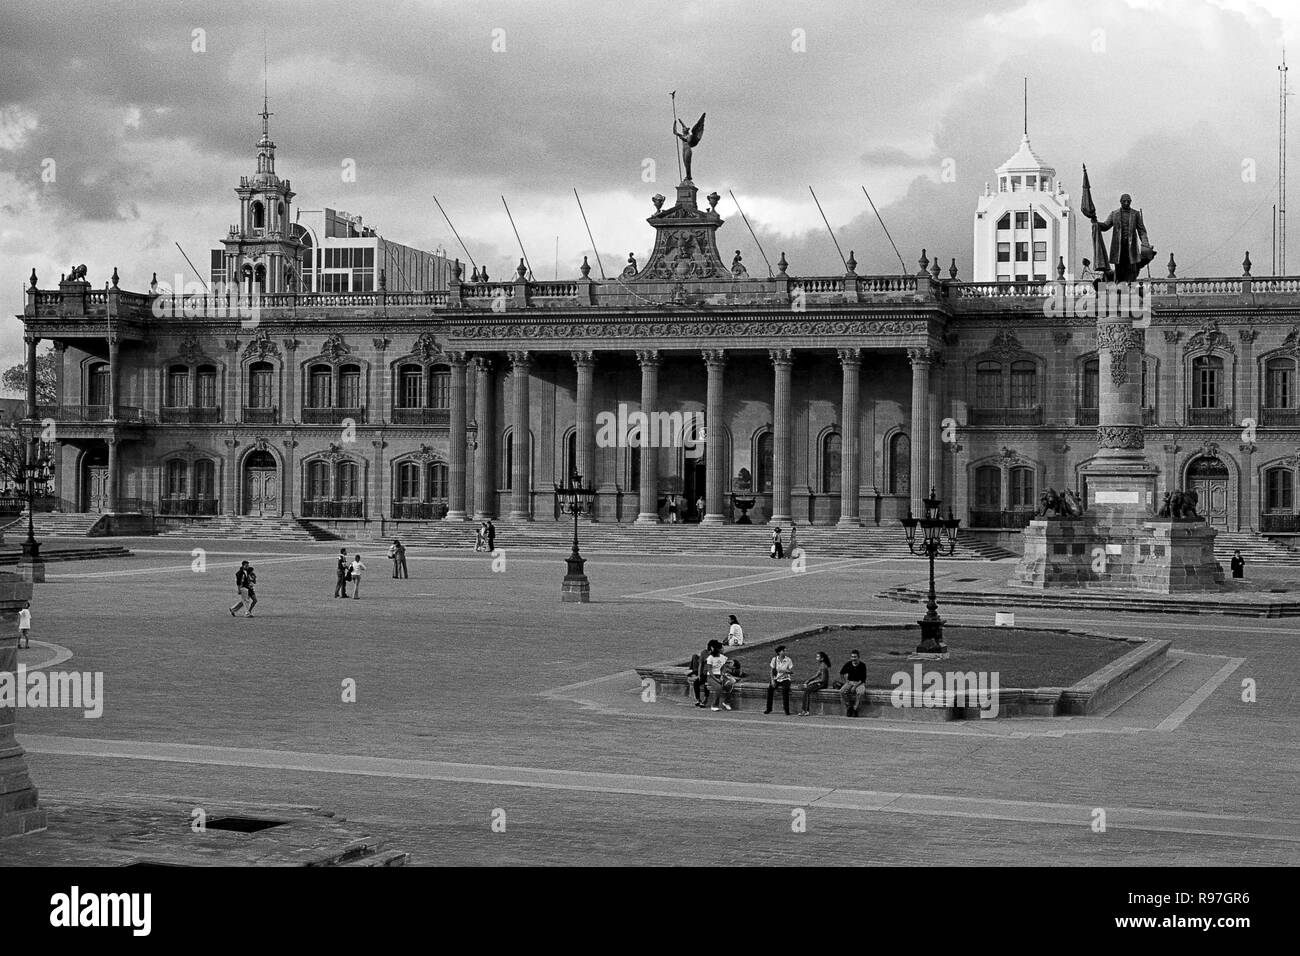 MONTERREY, NL/MEXICO - NOV 10, 2003: View of the Macroplaza and the Governor's palace on the background Stock Photo